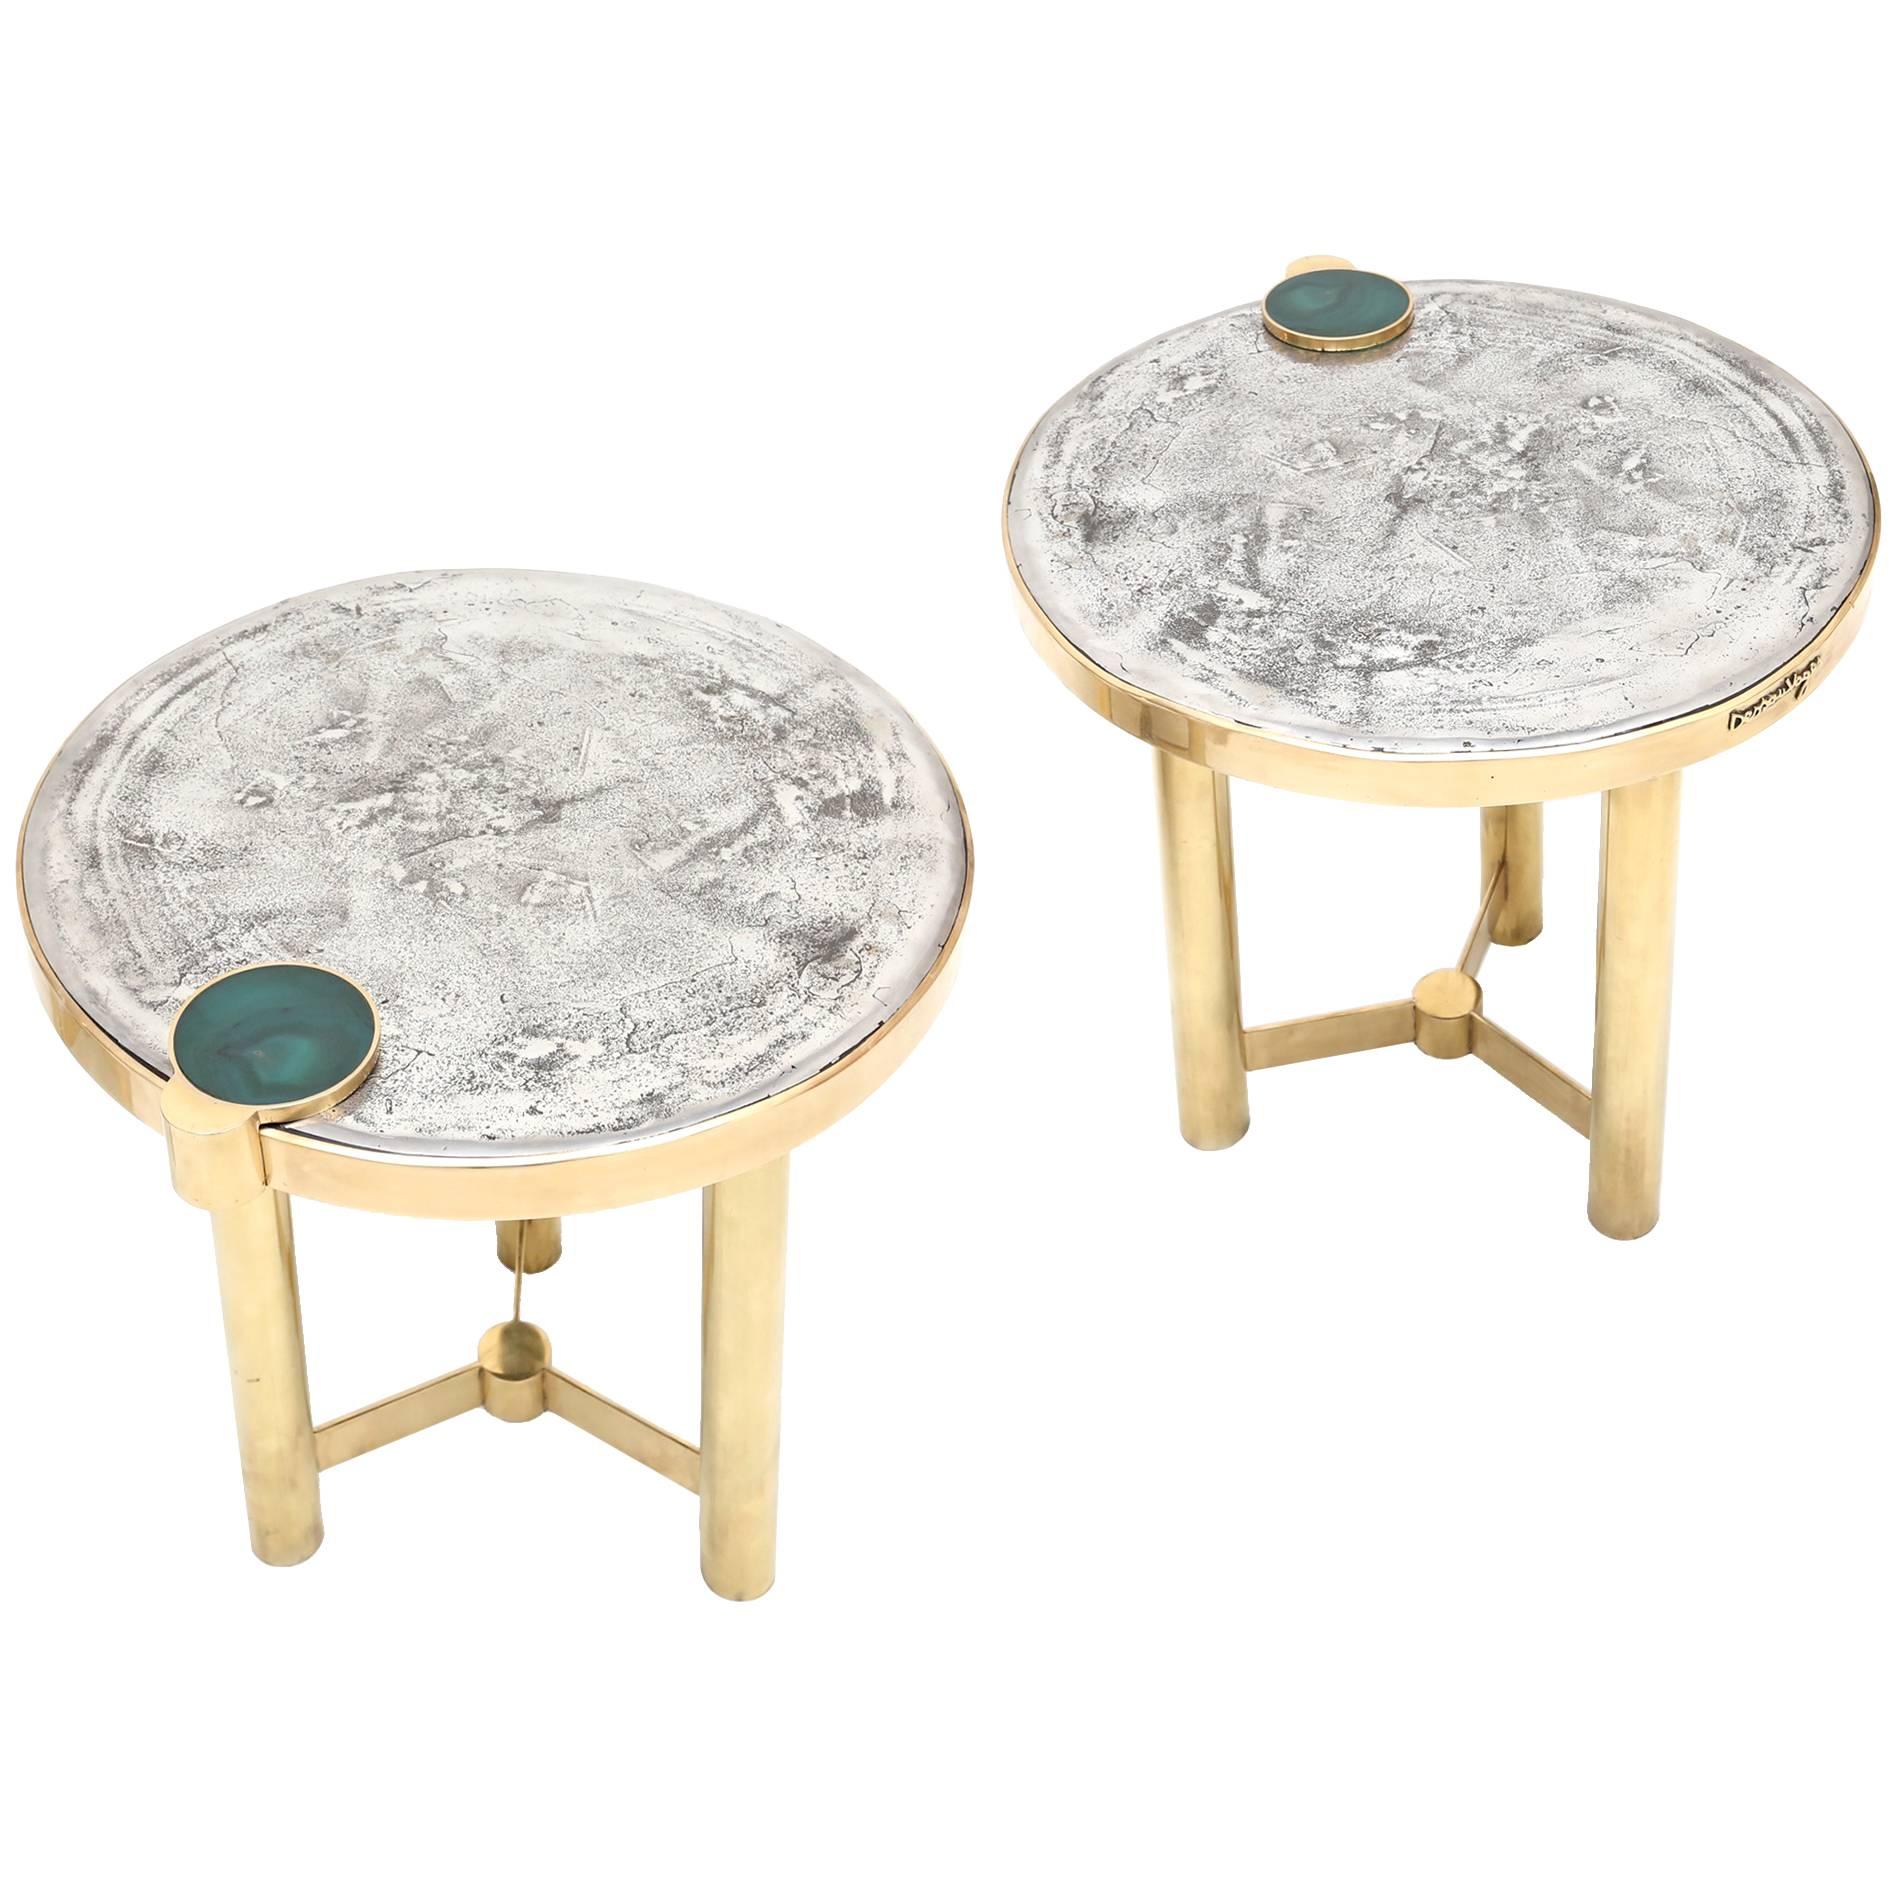 Moonraker Side Table Set by Dessauvages